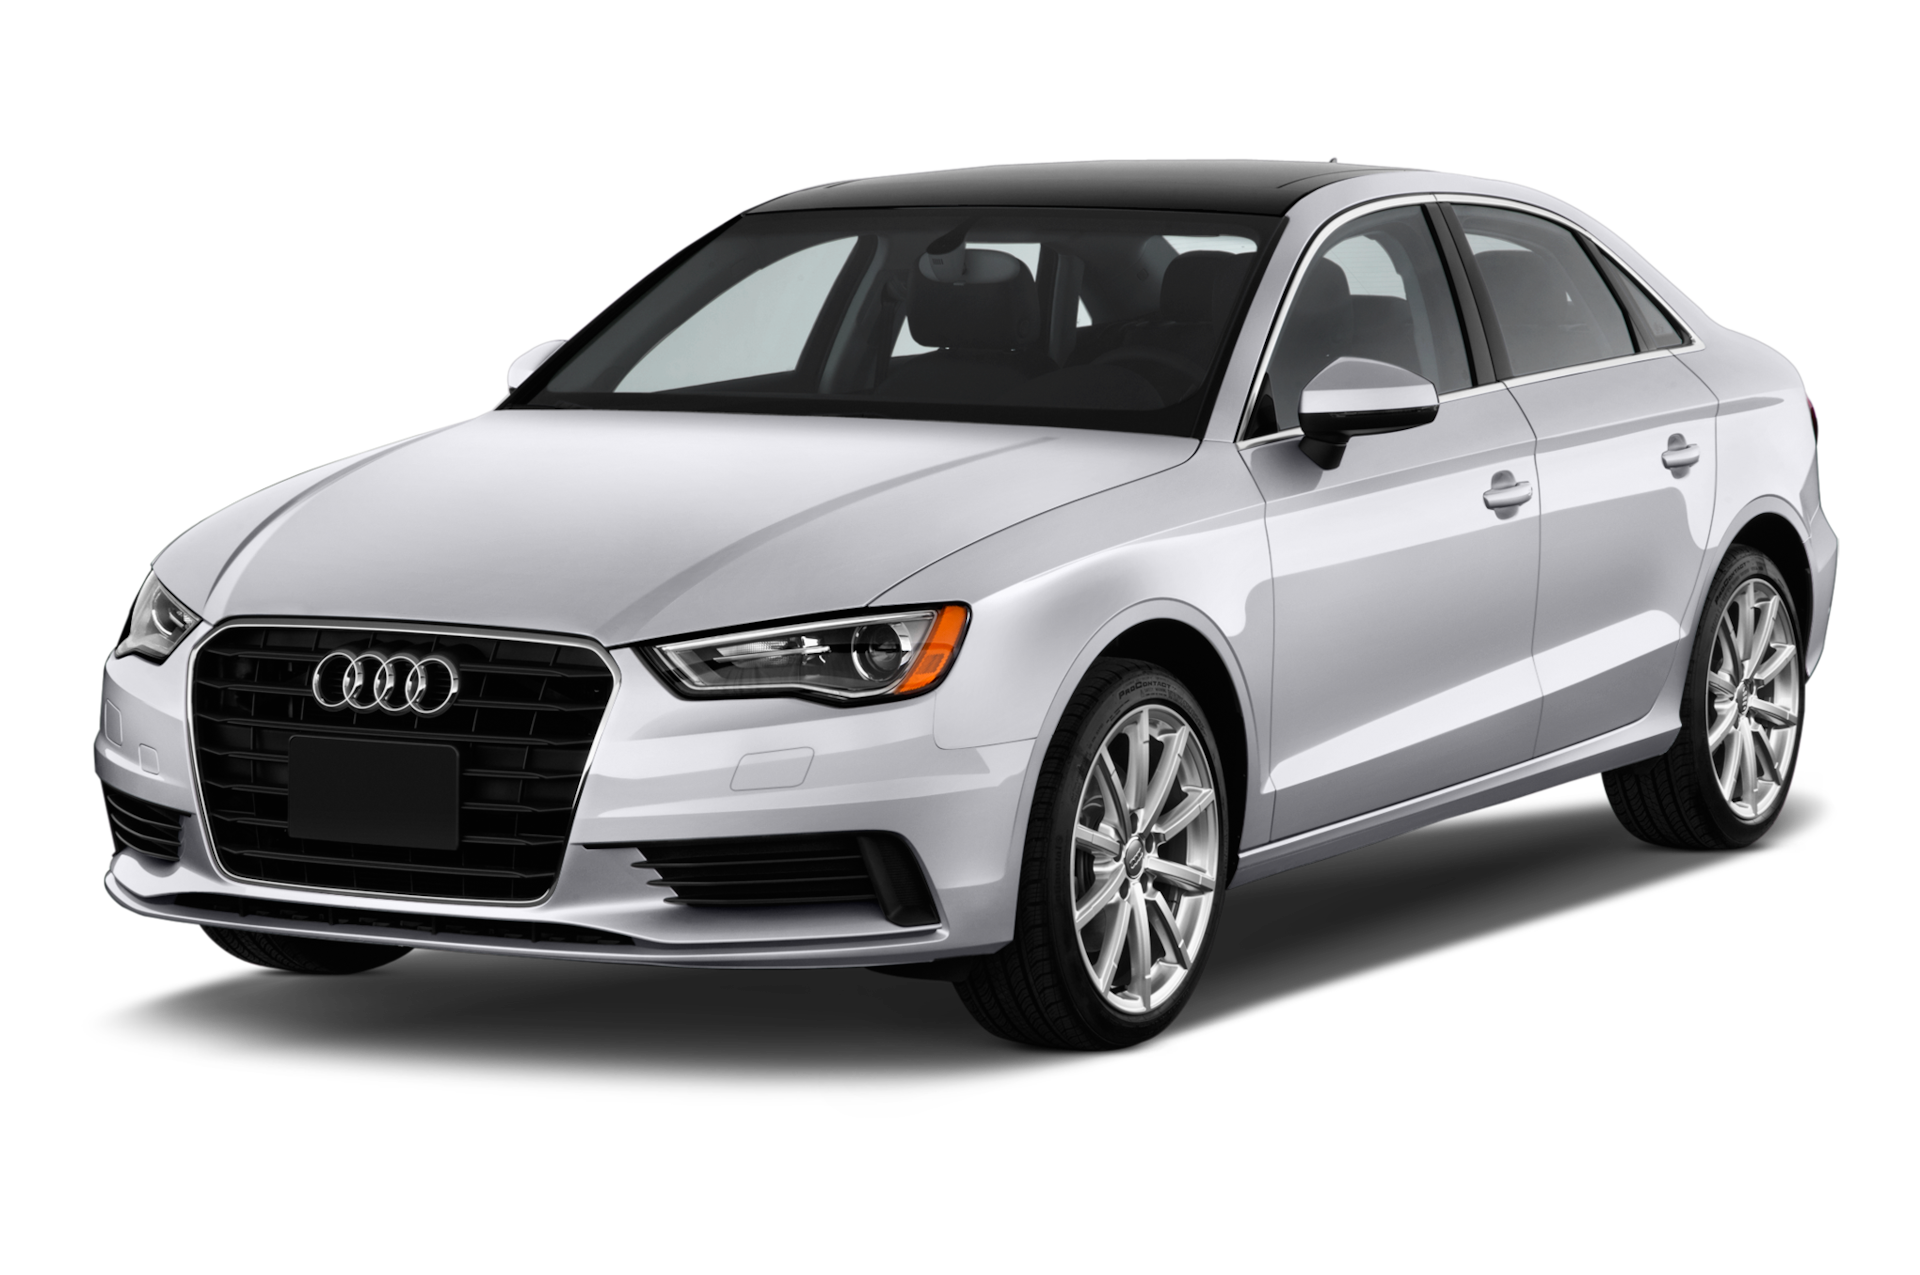 2016 Audi A3 Prices, Reviews, and Photos - MotorTrend